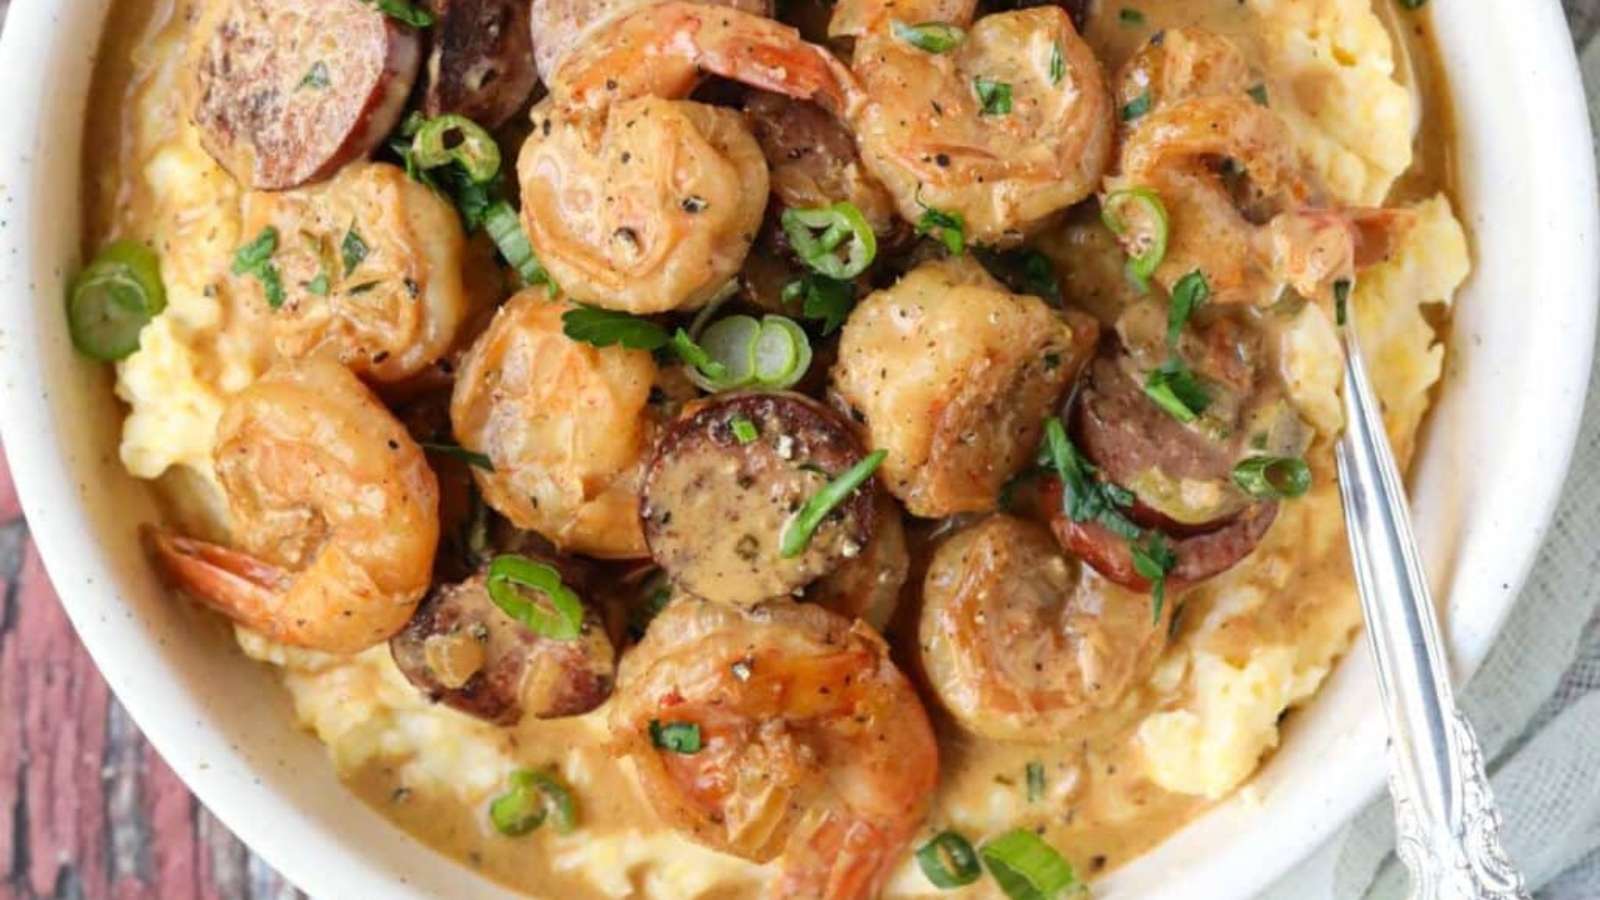 Shrimp and grits in a white bowl.